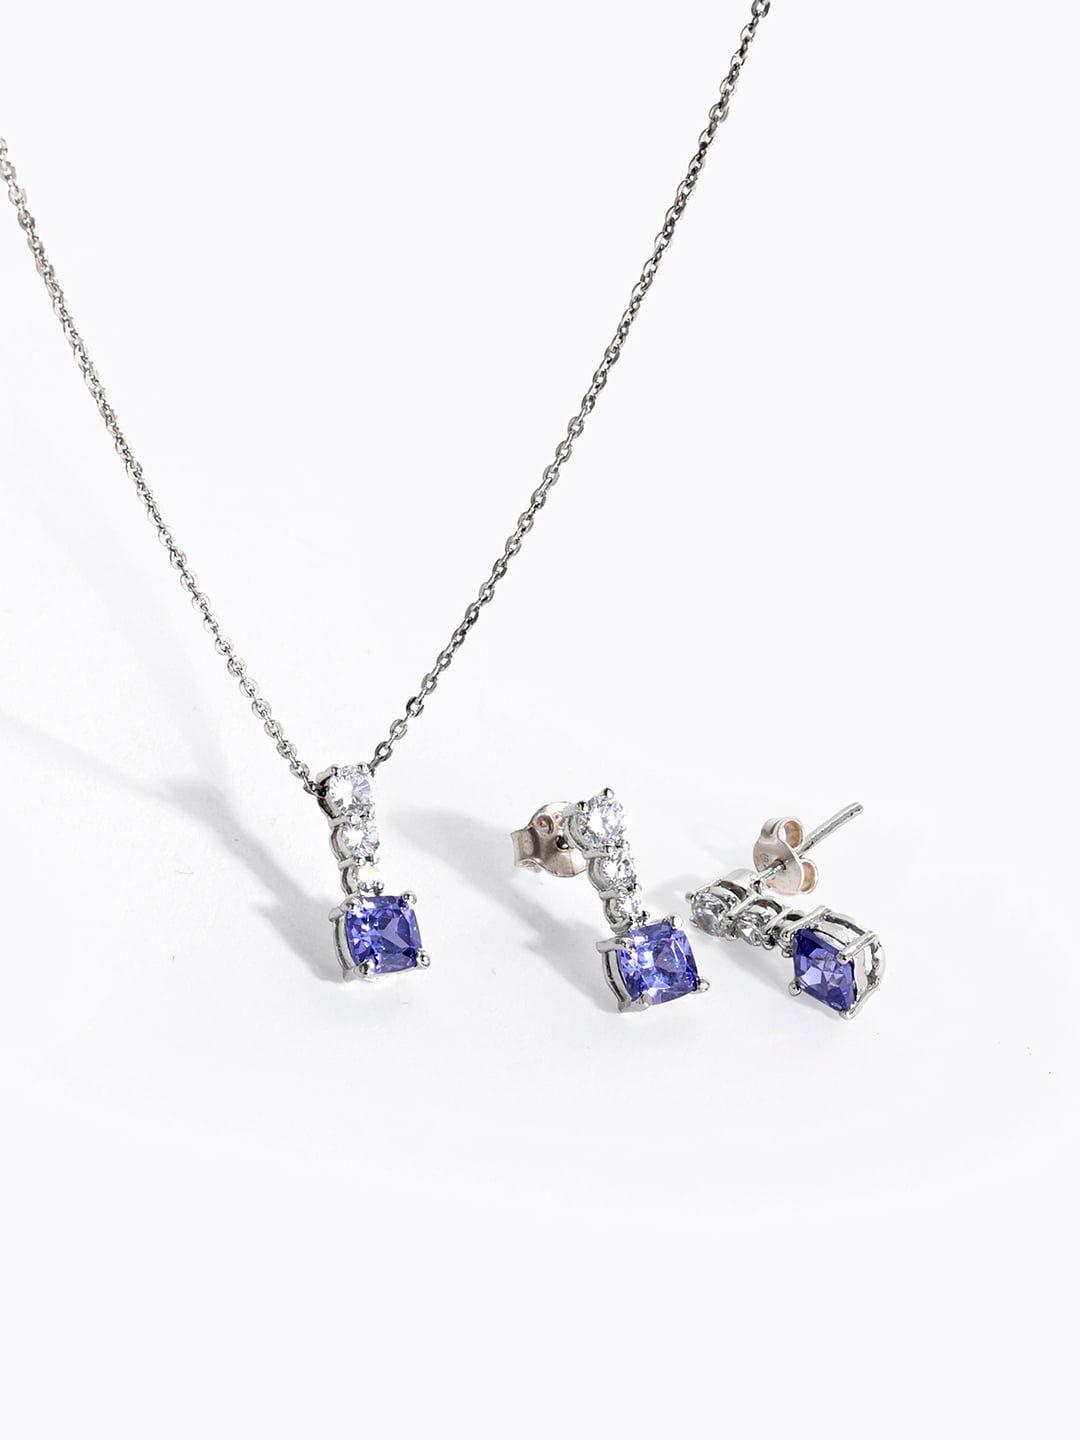 mikoto by fablestreet   silver-plated  white & blue cz-studded jewellery set